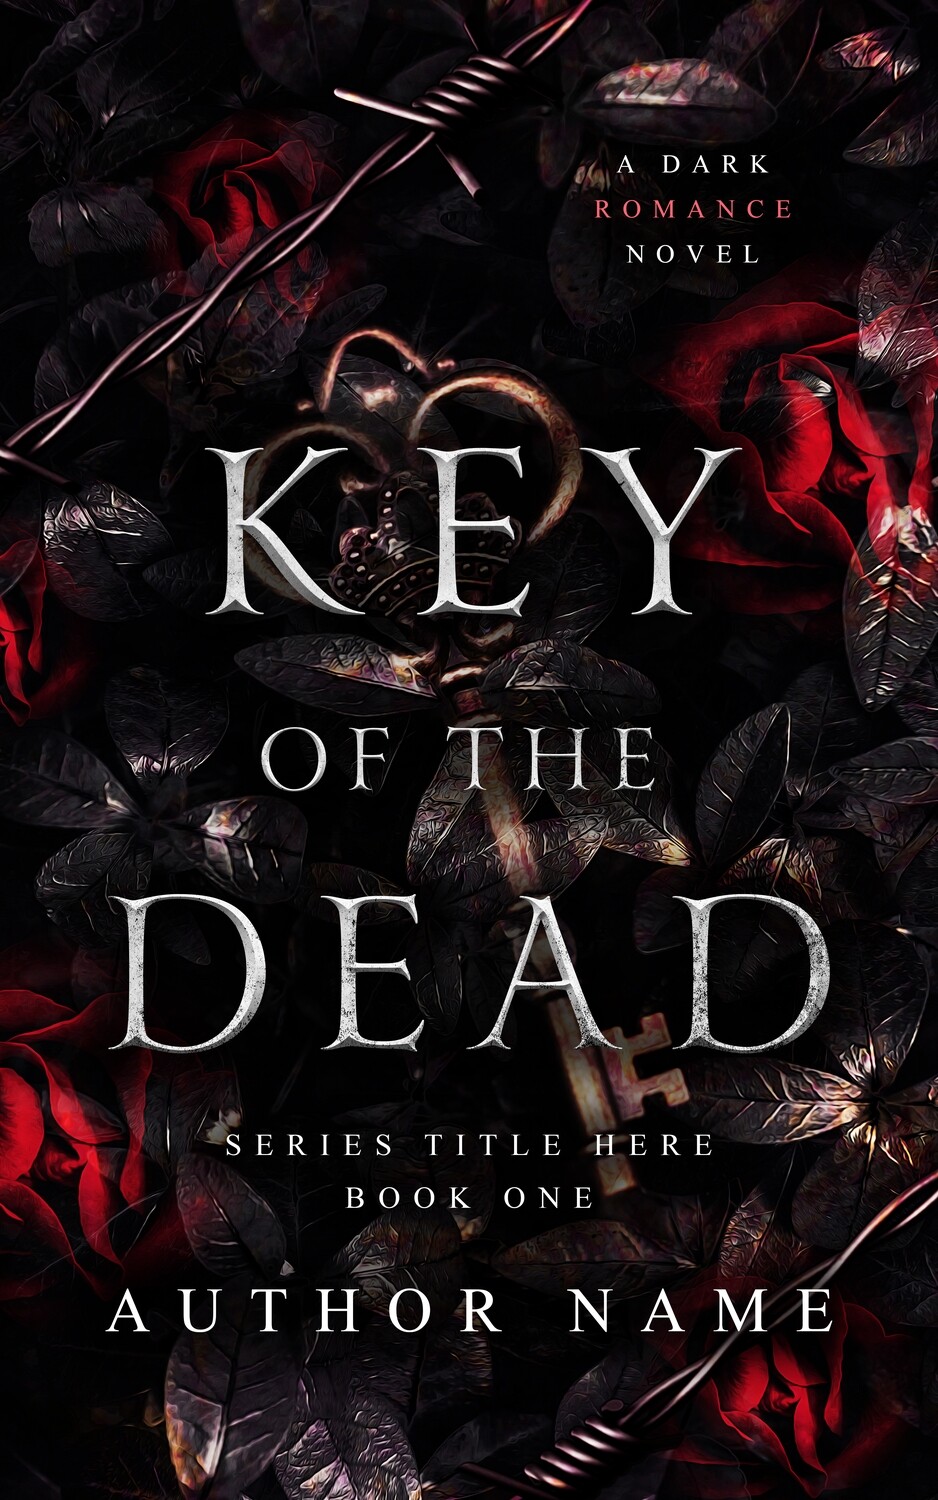 KEY OF THE DEAD